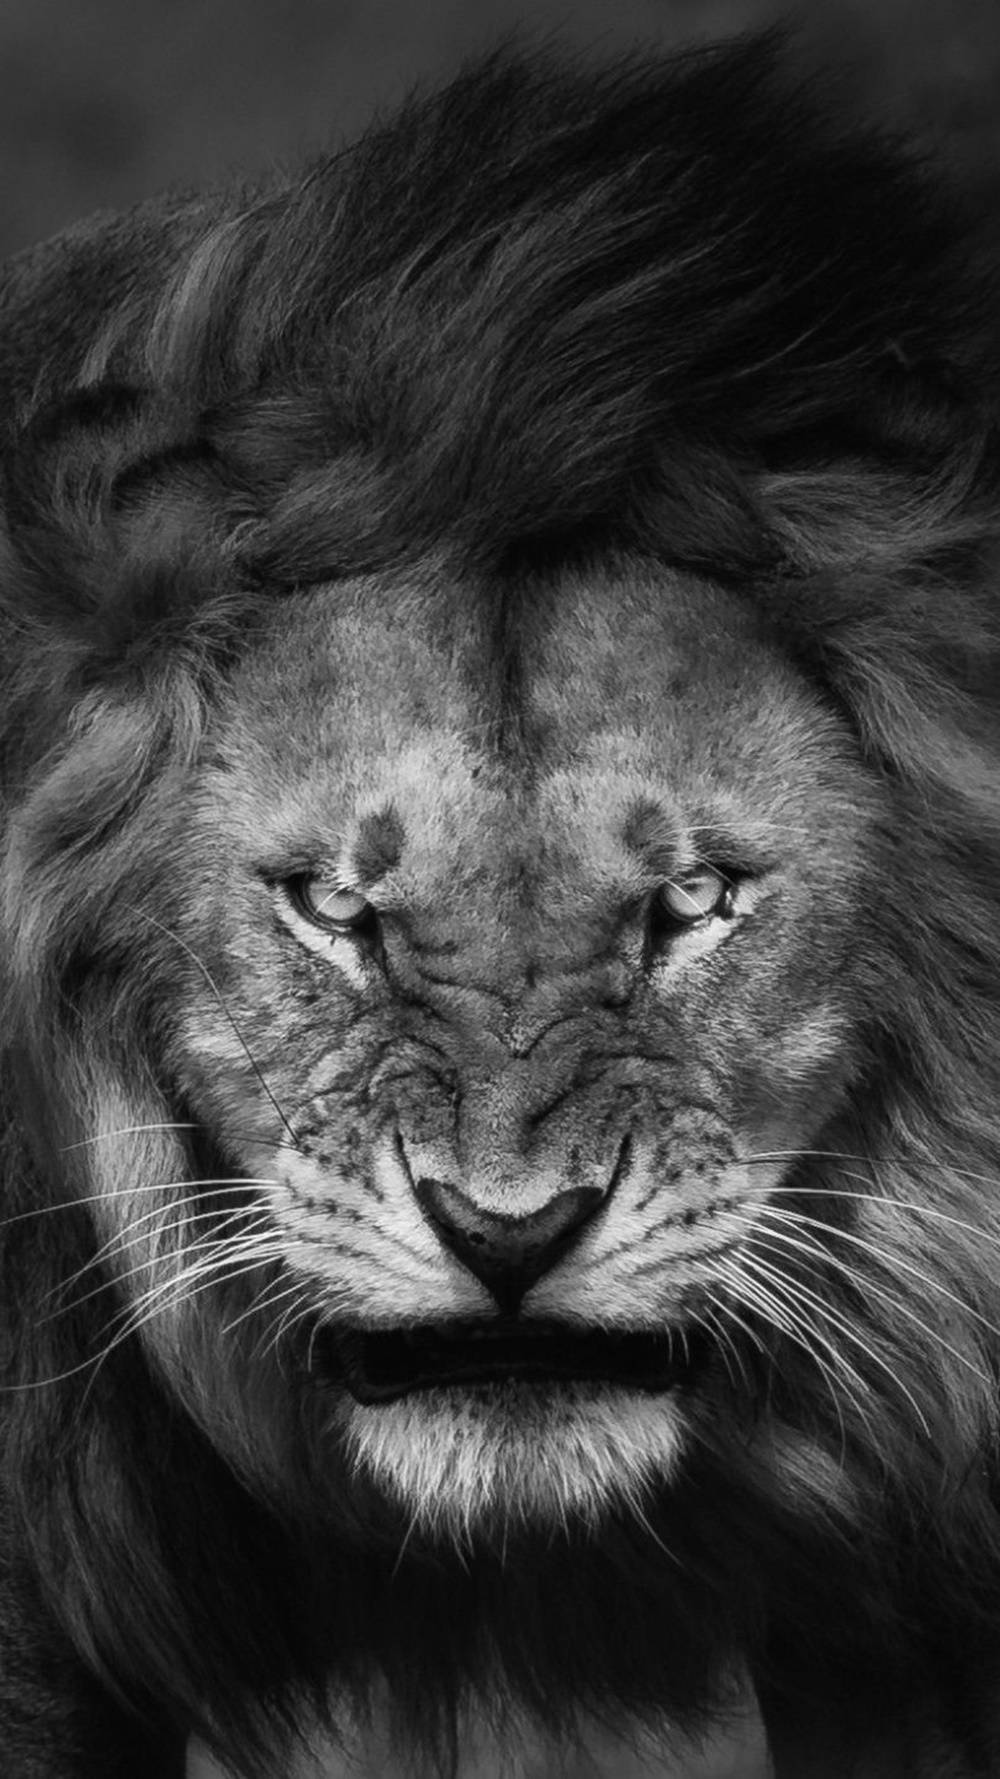 Furious Wild Lion Iphone Background